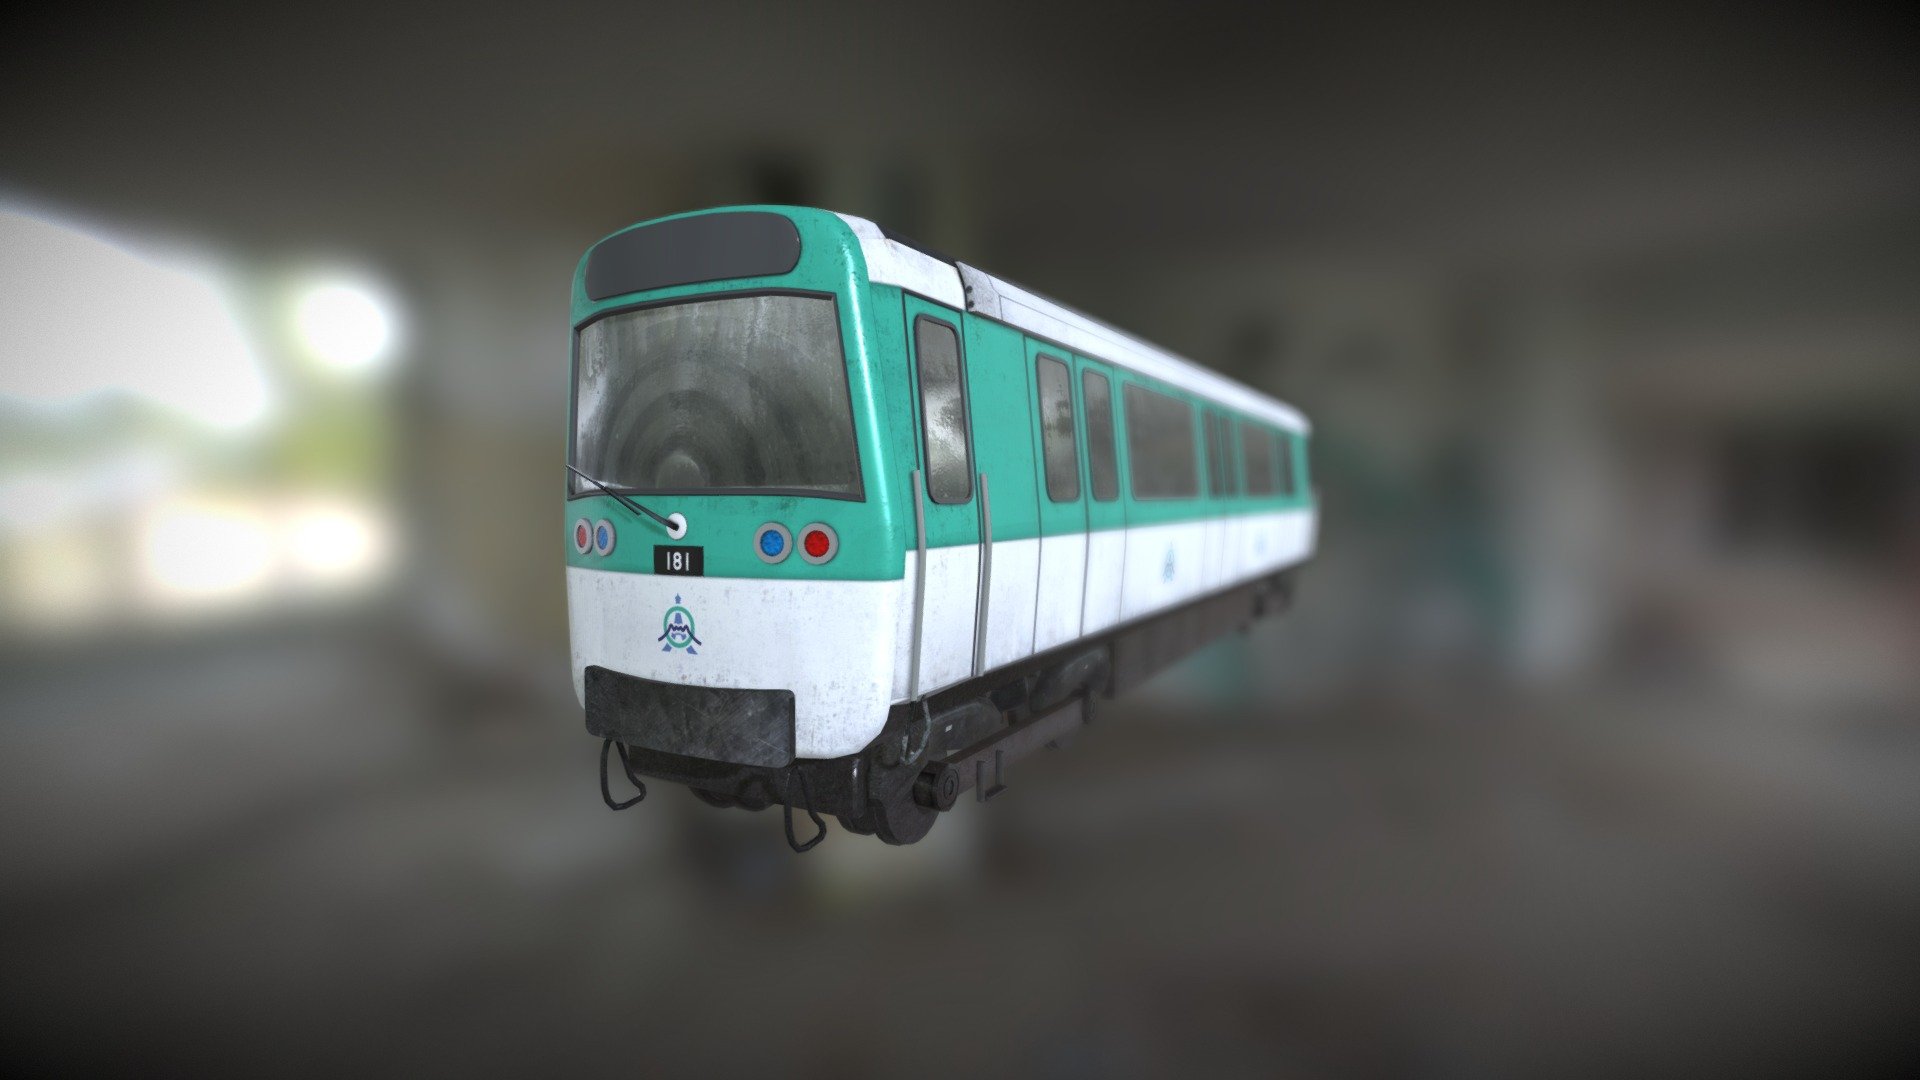 Low poly model of a Paris metro car.
Originaly made for the source engine as part of a CS:GO map in the making 3d model